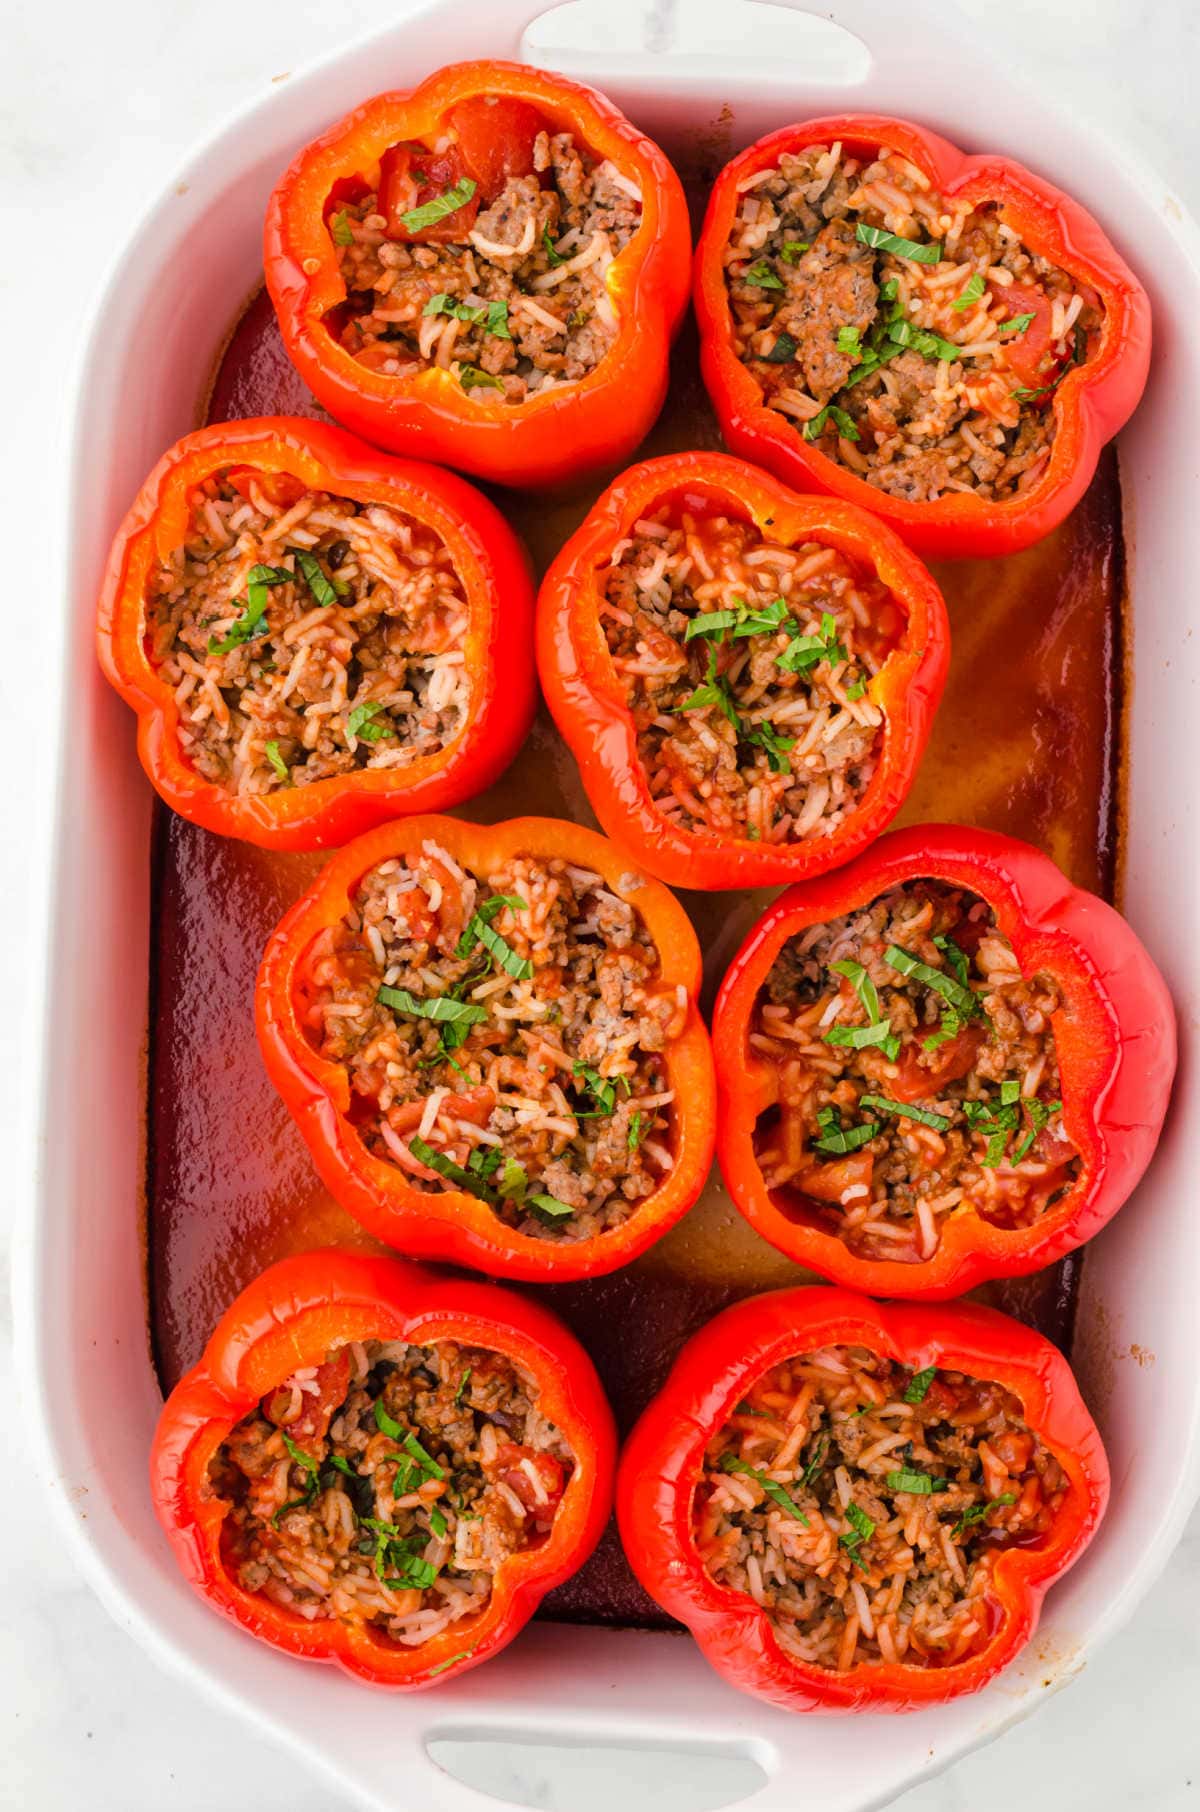 Overhead view of stuffed peppers in a casserole dish.